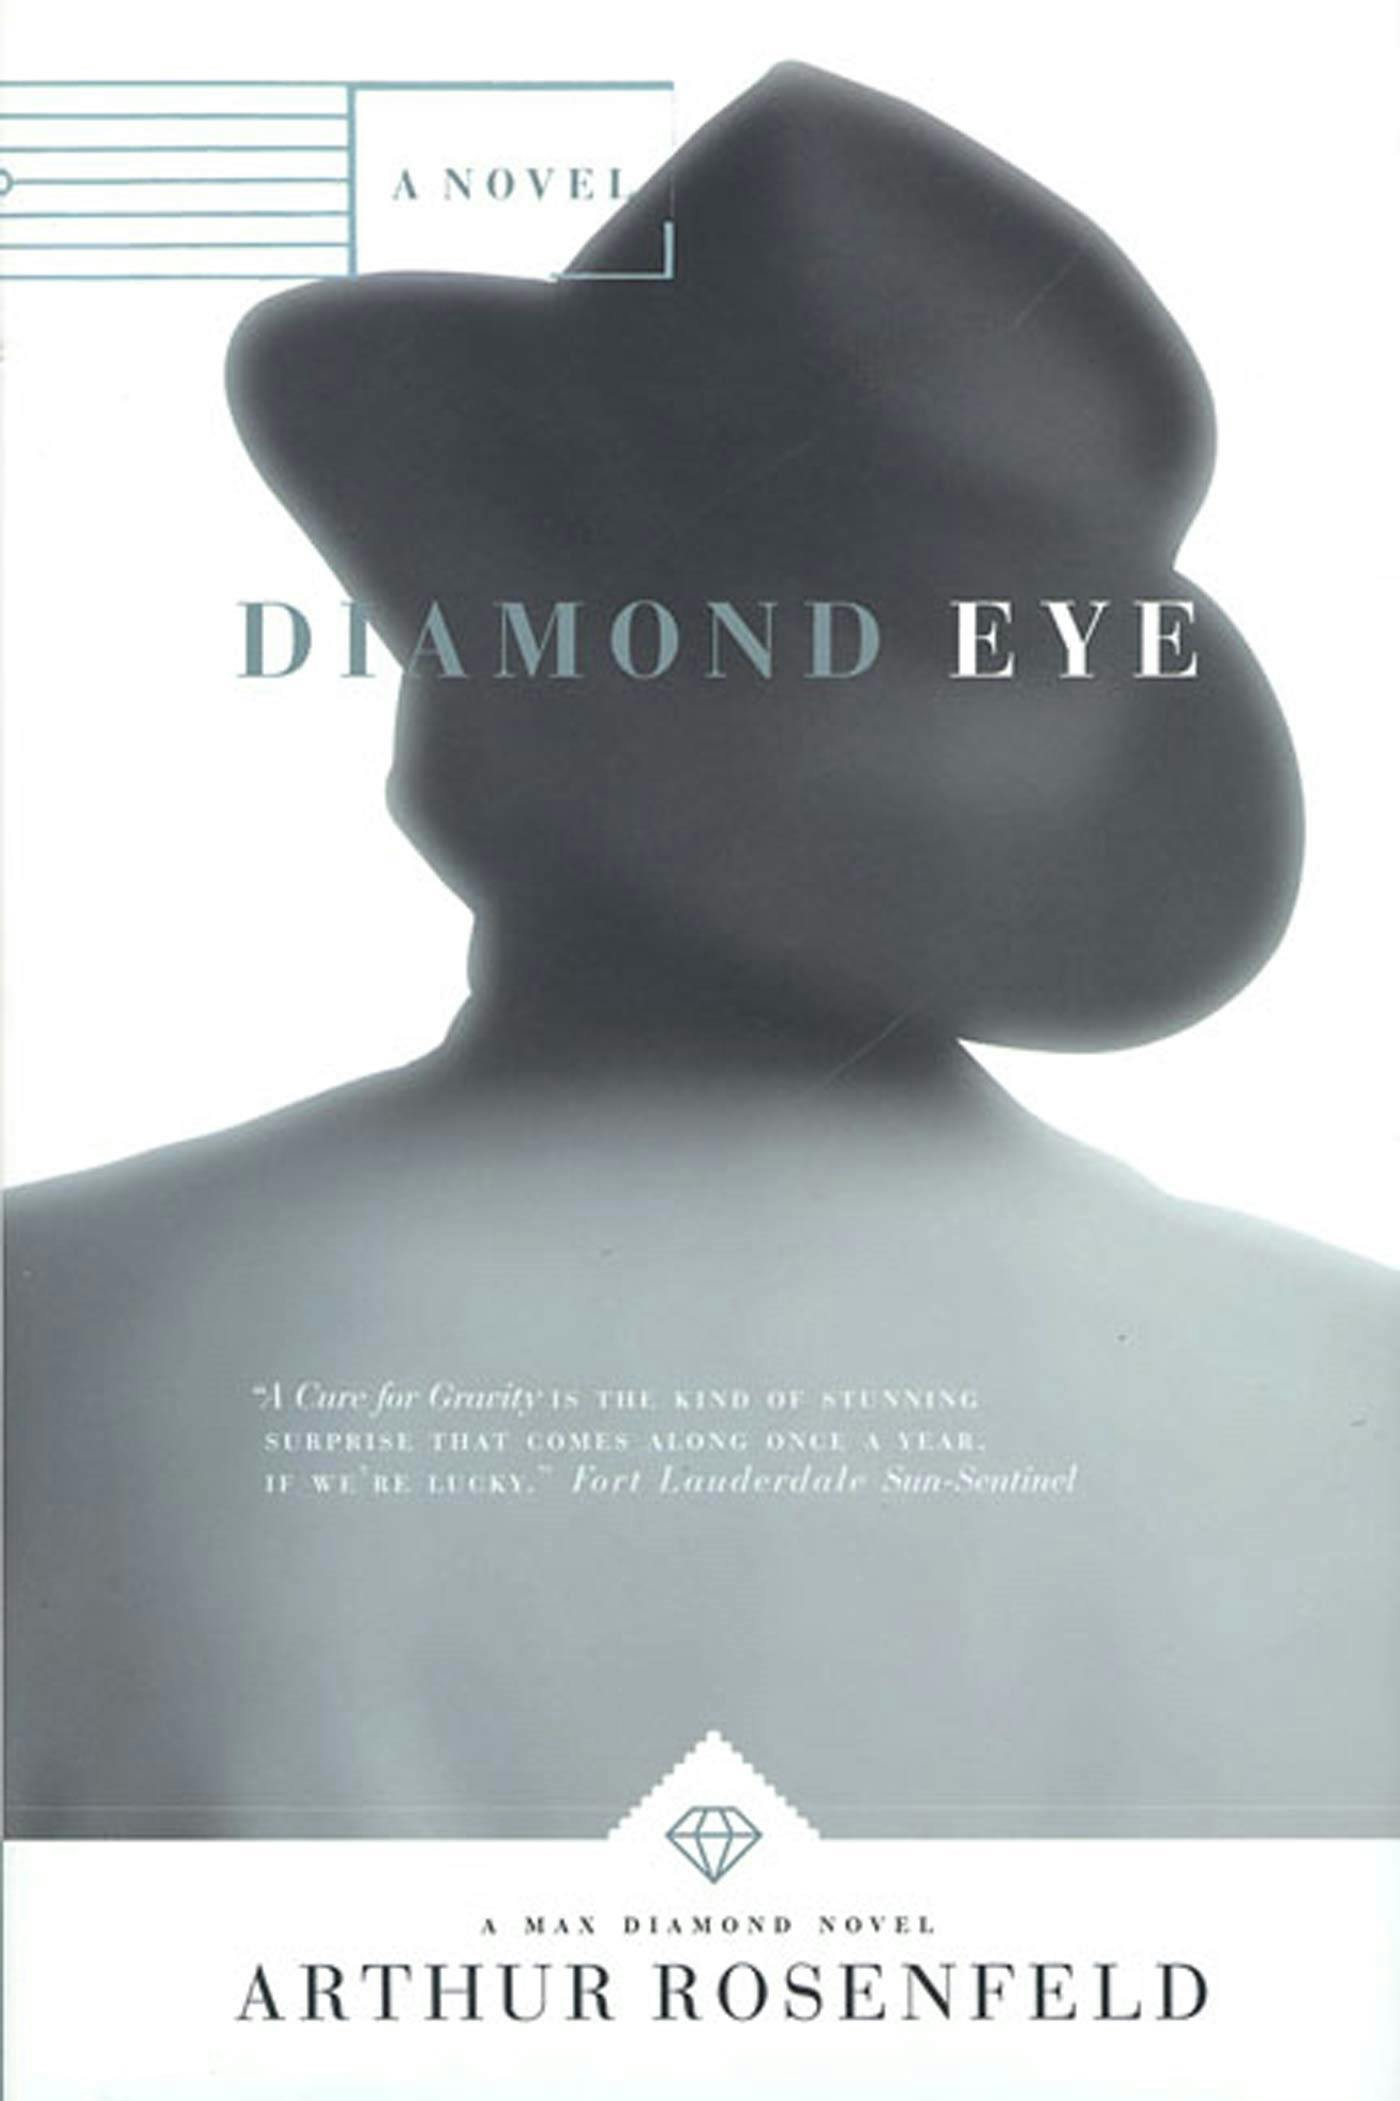 Cover for the book titled as: Diamond Eye